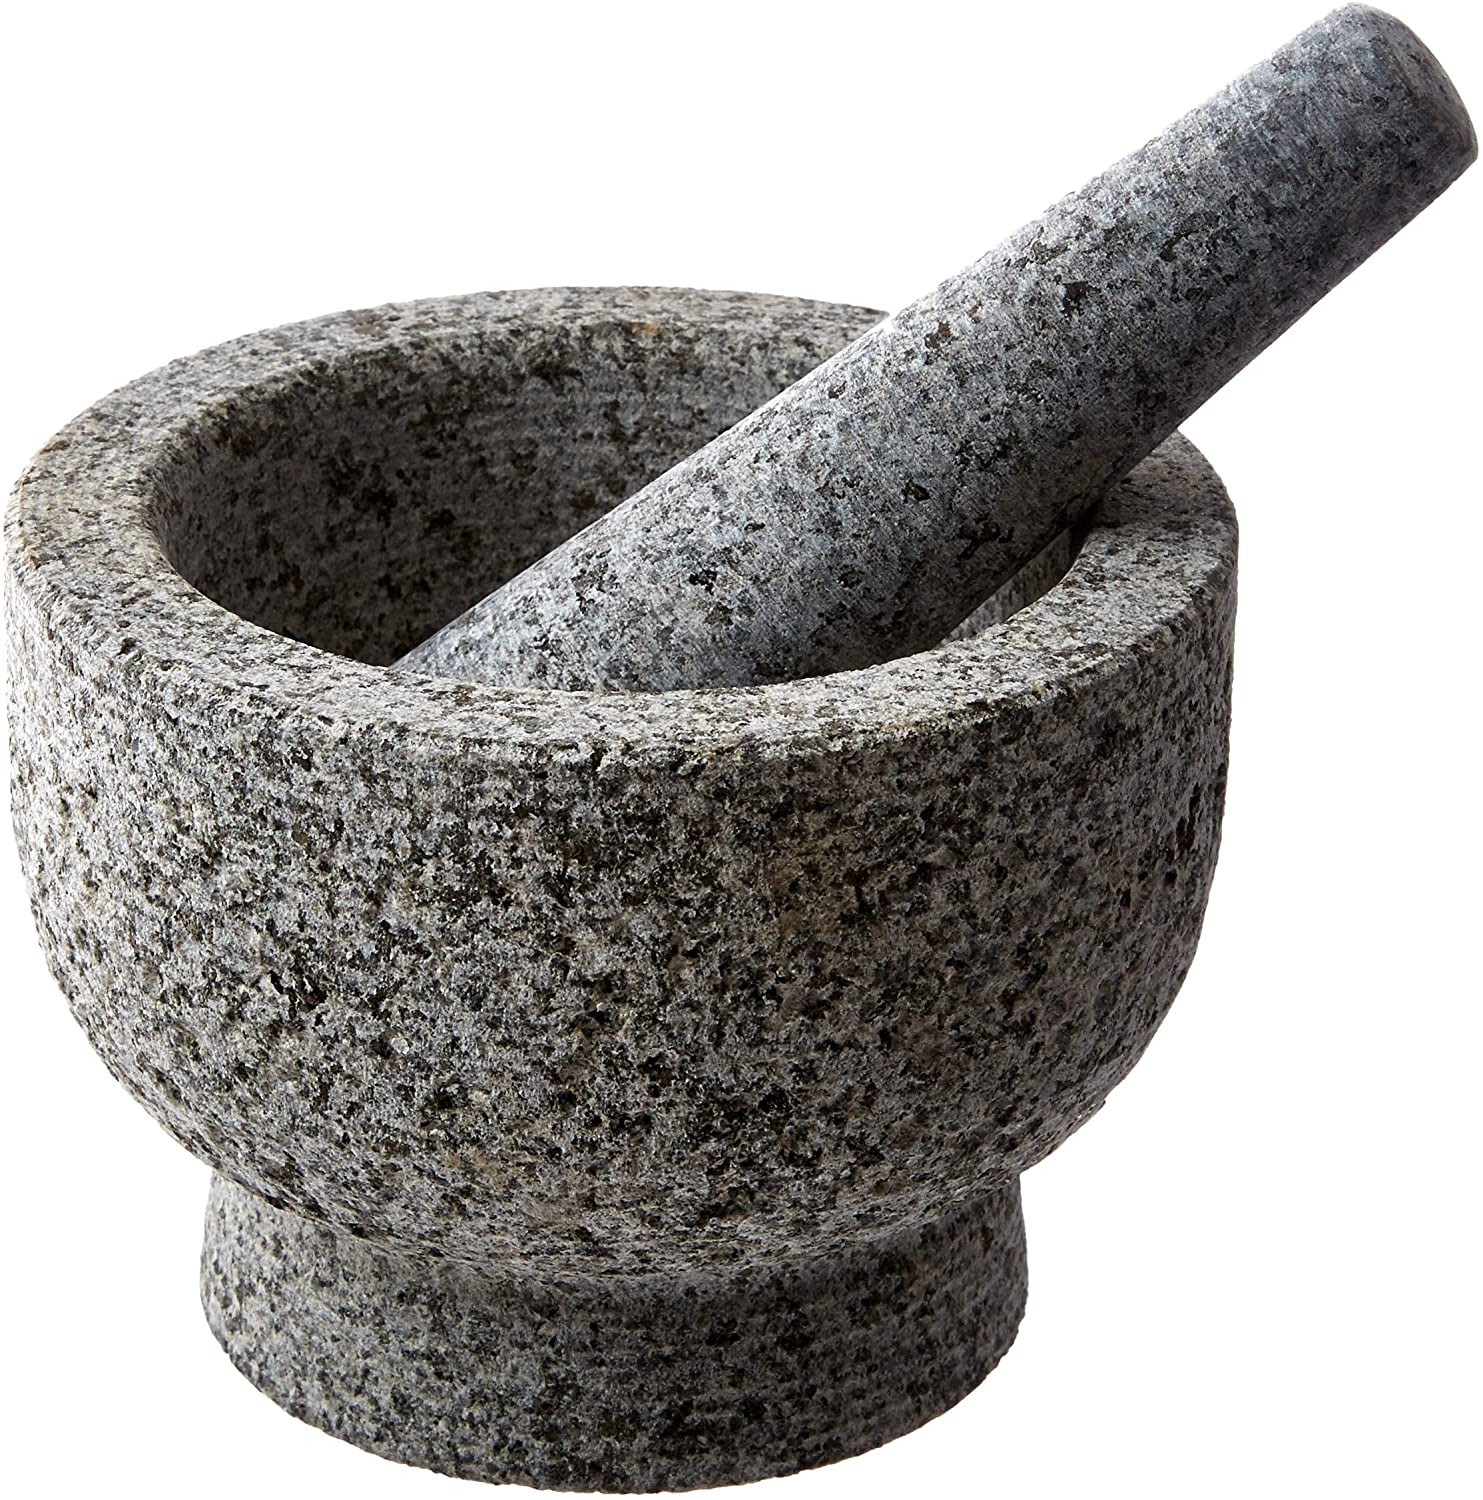 Best Mortar and Pestle for Weed